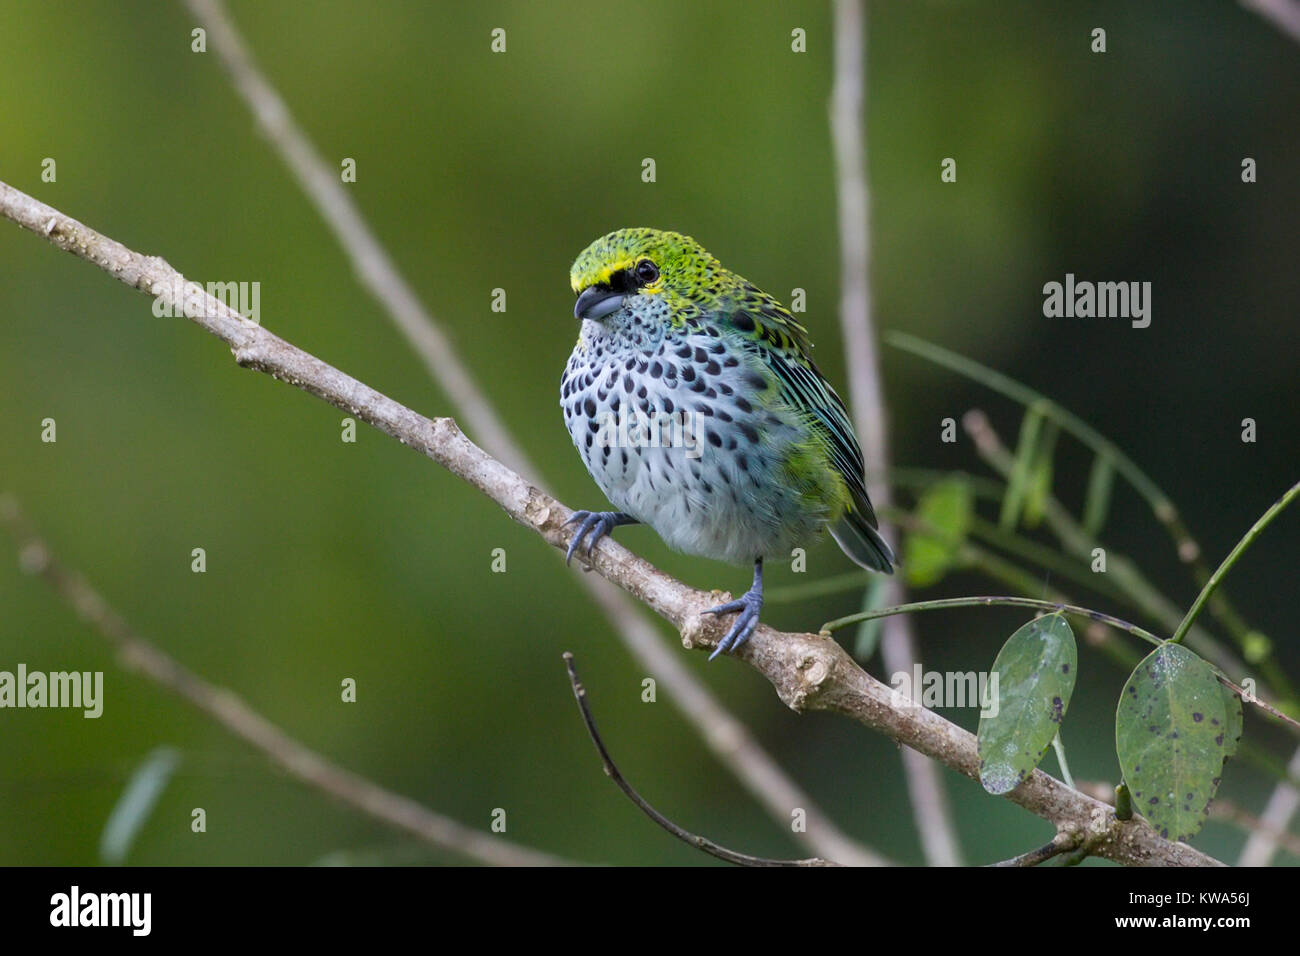 Speckled Tanager perched on a branch Stock Photo